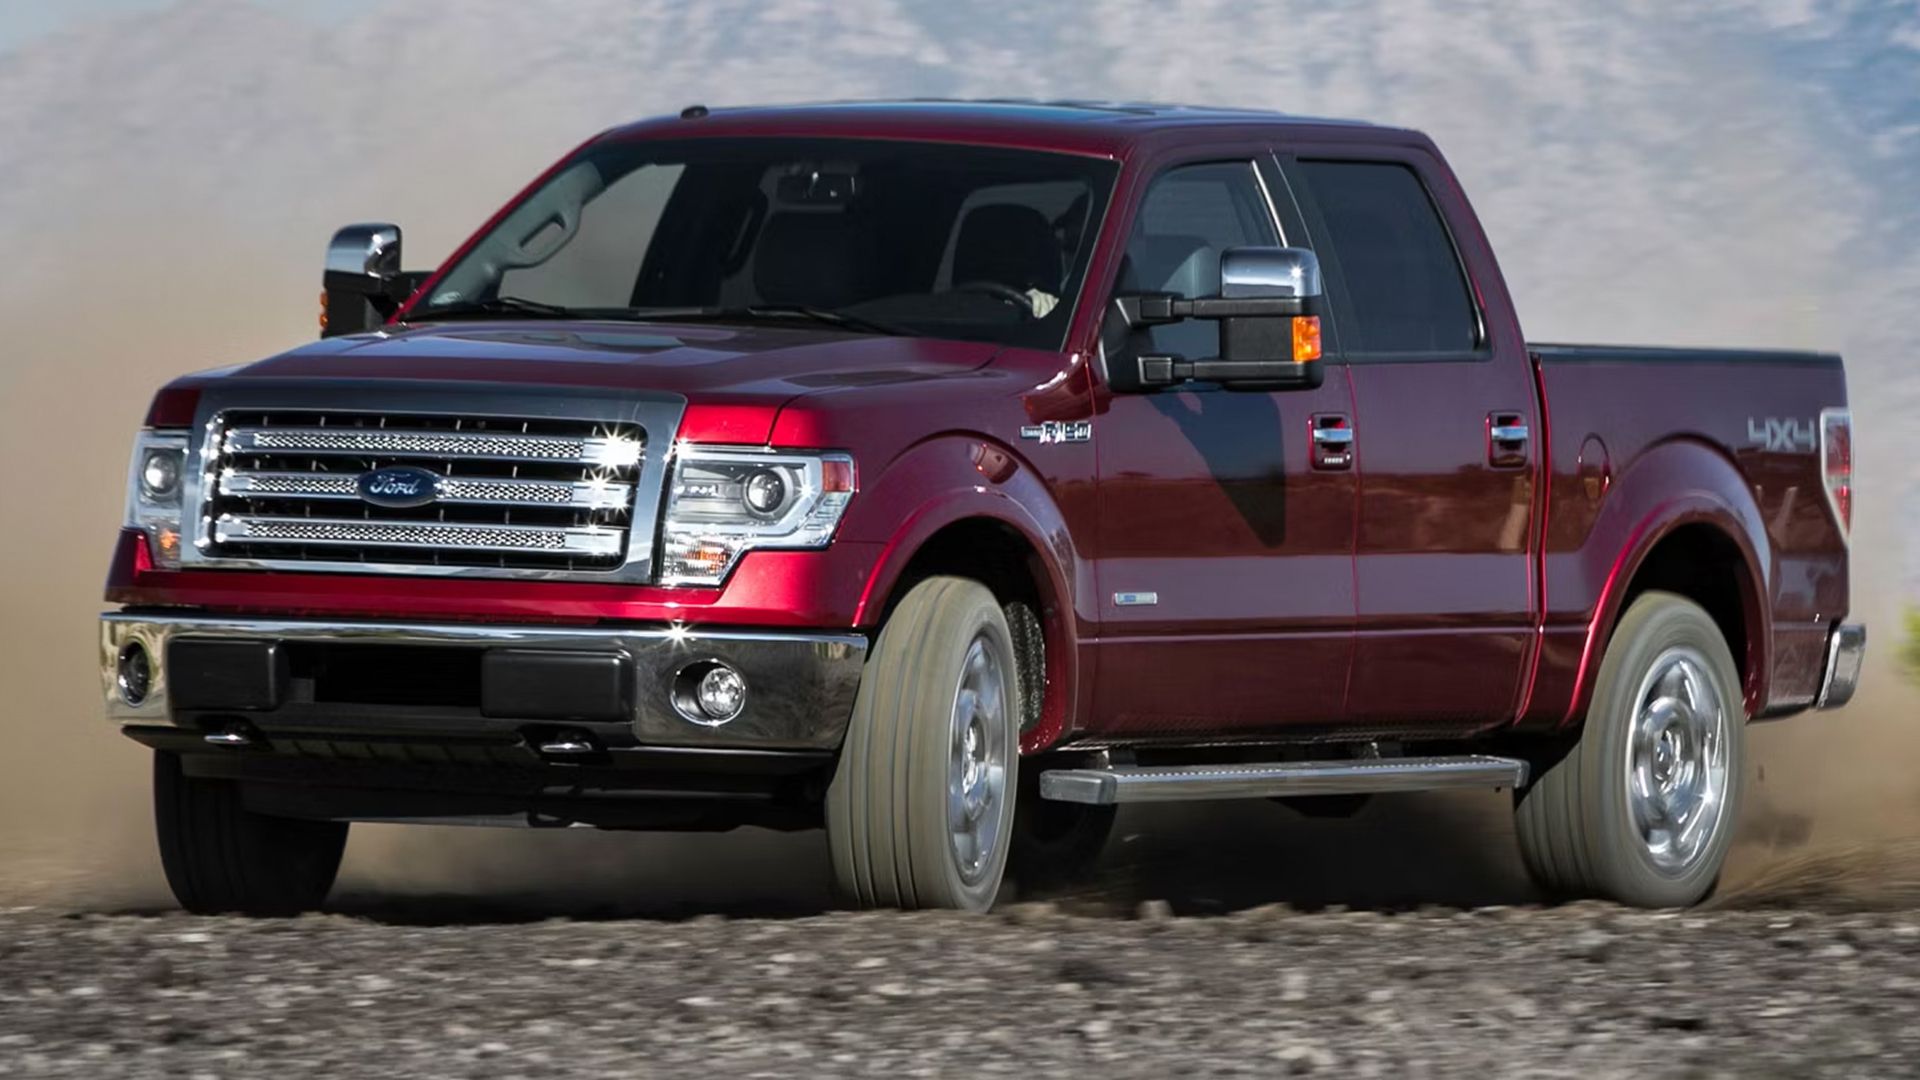 Exterior photo of the 2013 Ford F-150